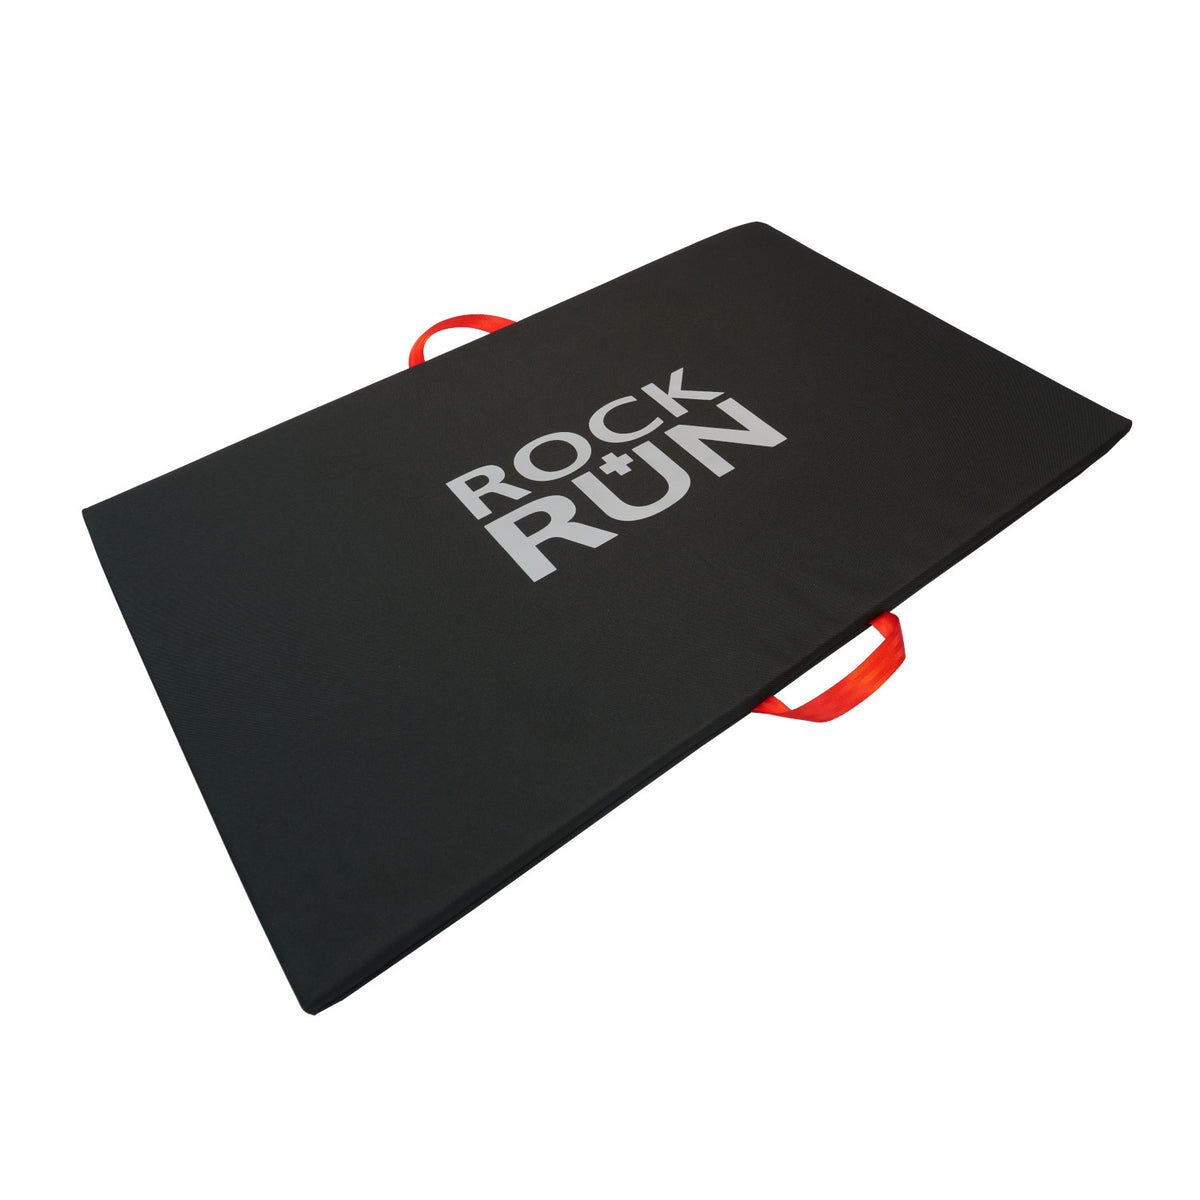 Rock + Run Showdown Pad in black with red handles